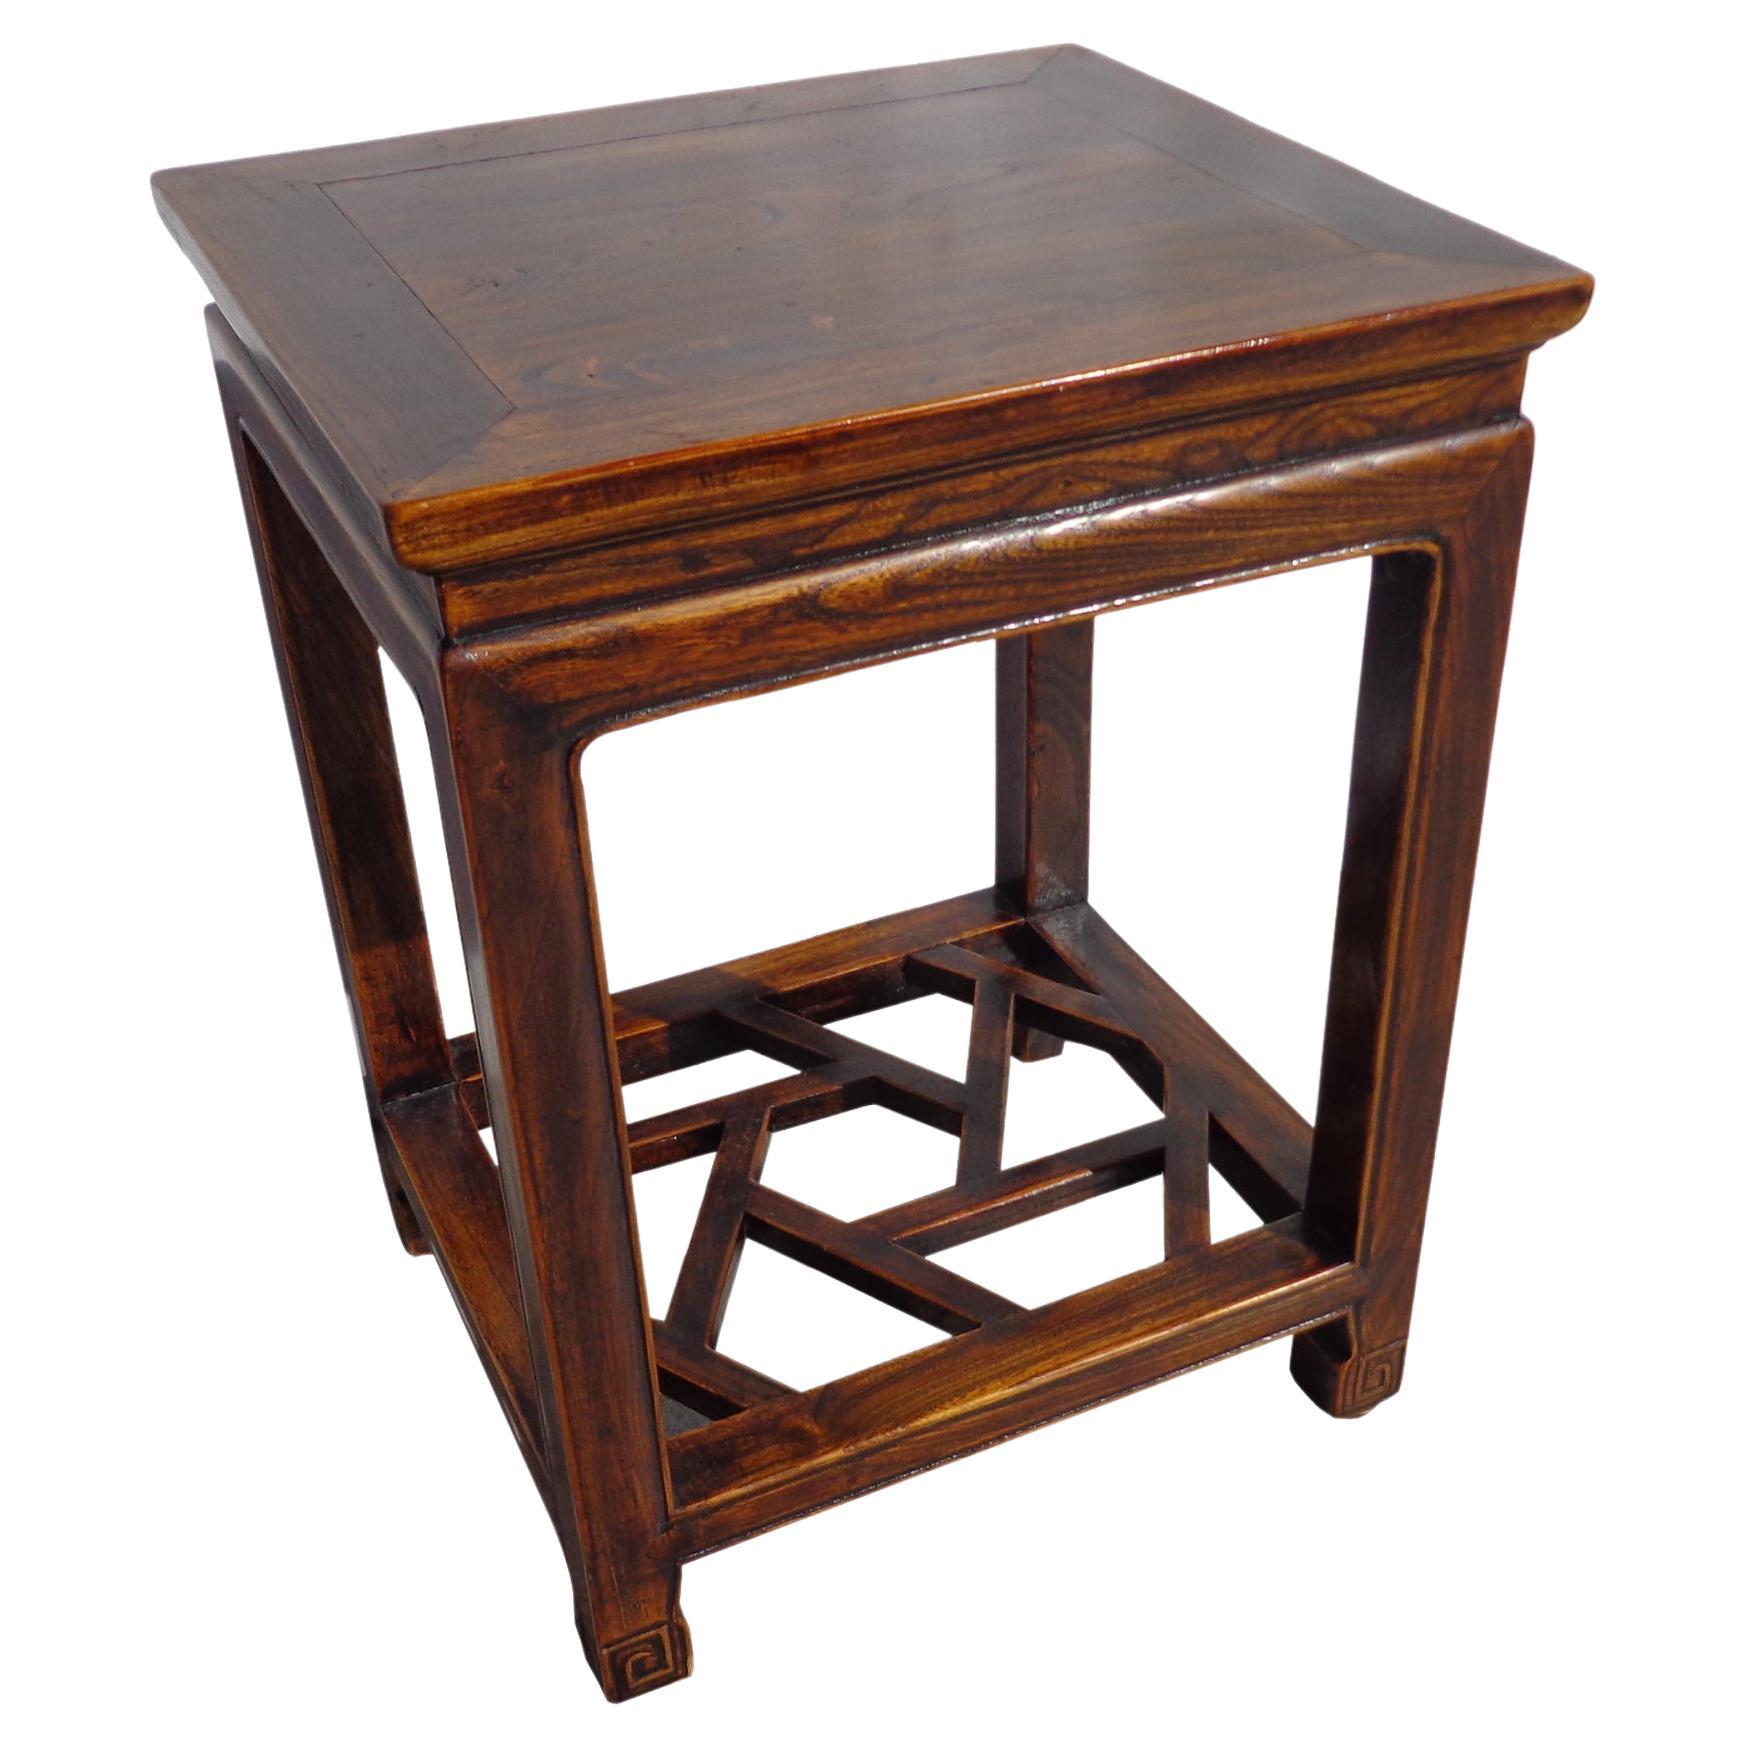 Ming Style Chinosarie Side Table with Fretwork